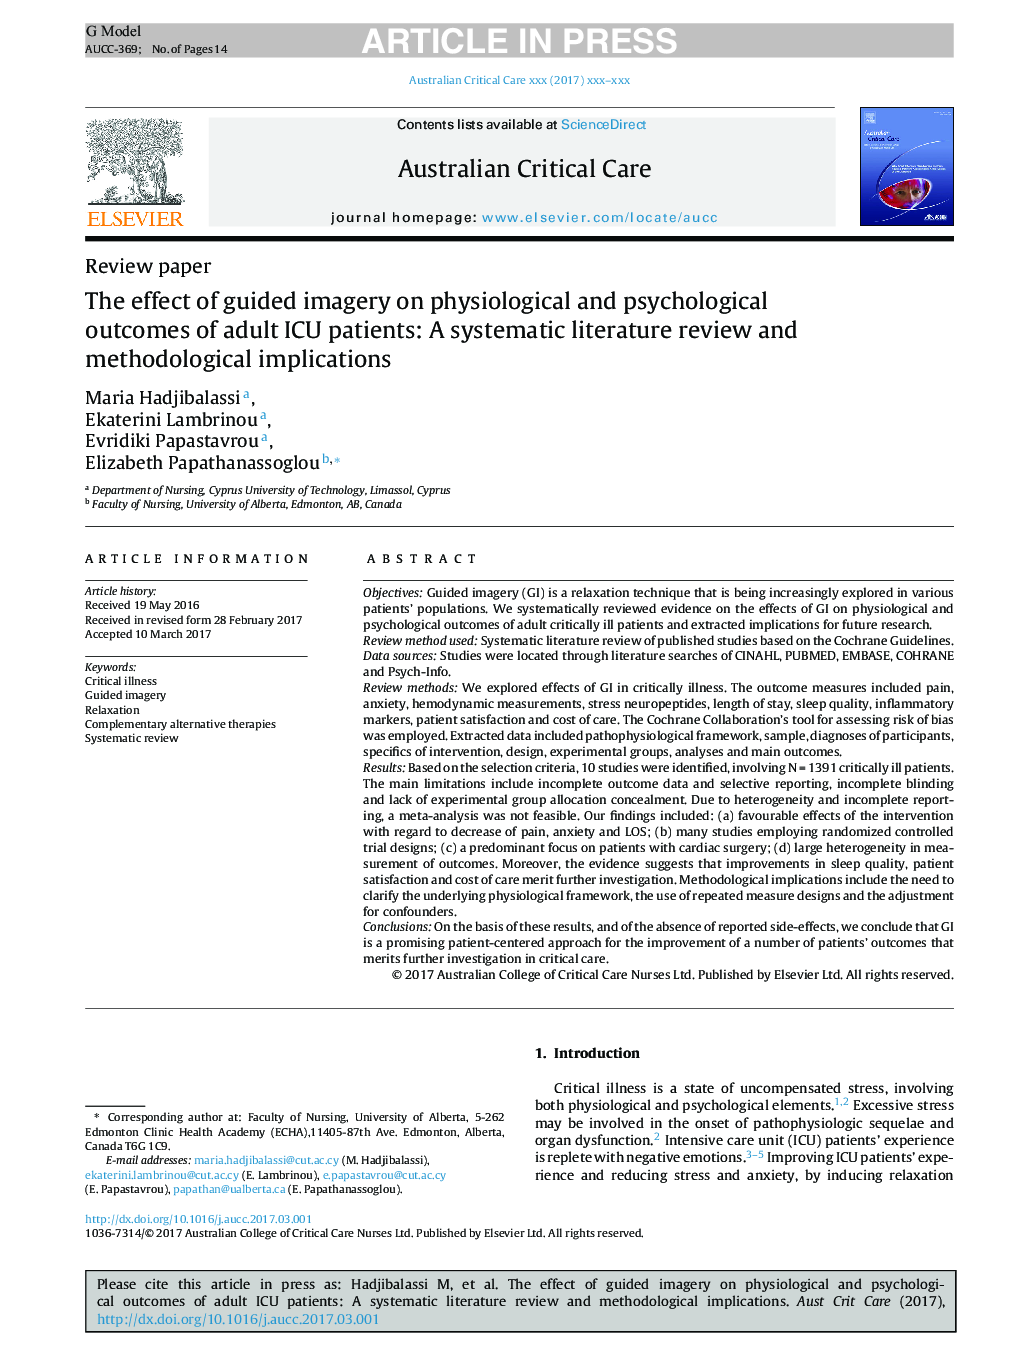 The effect of guided imagery on physiological and psychological outcomes of adult ICU patients: A systematic literature review and methodological implications